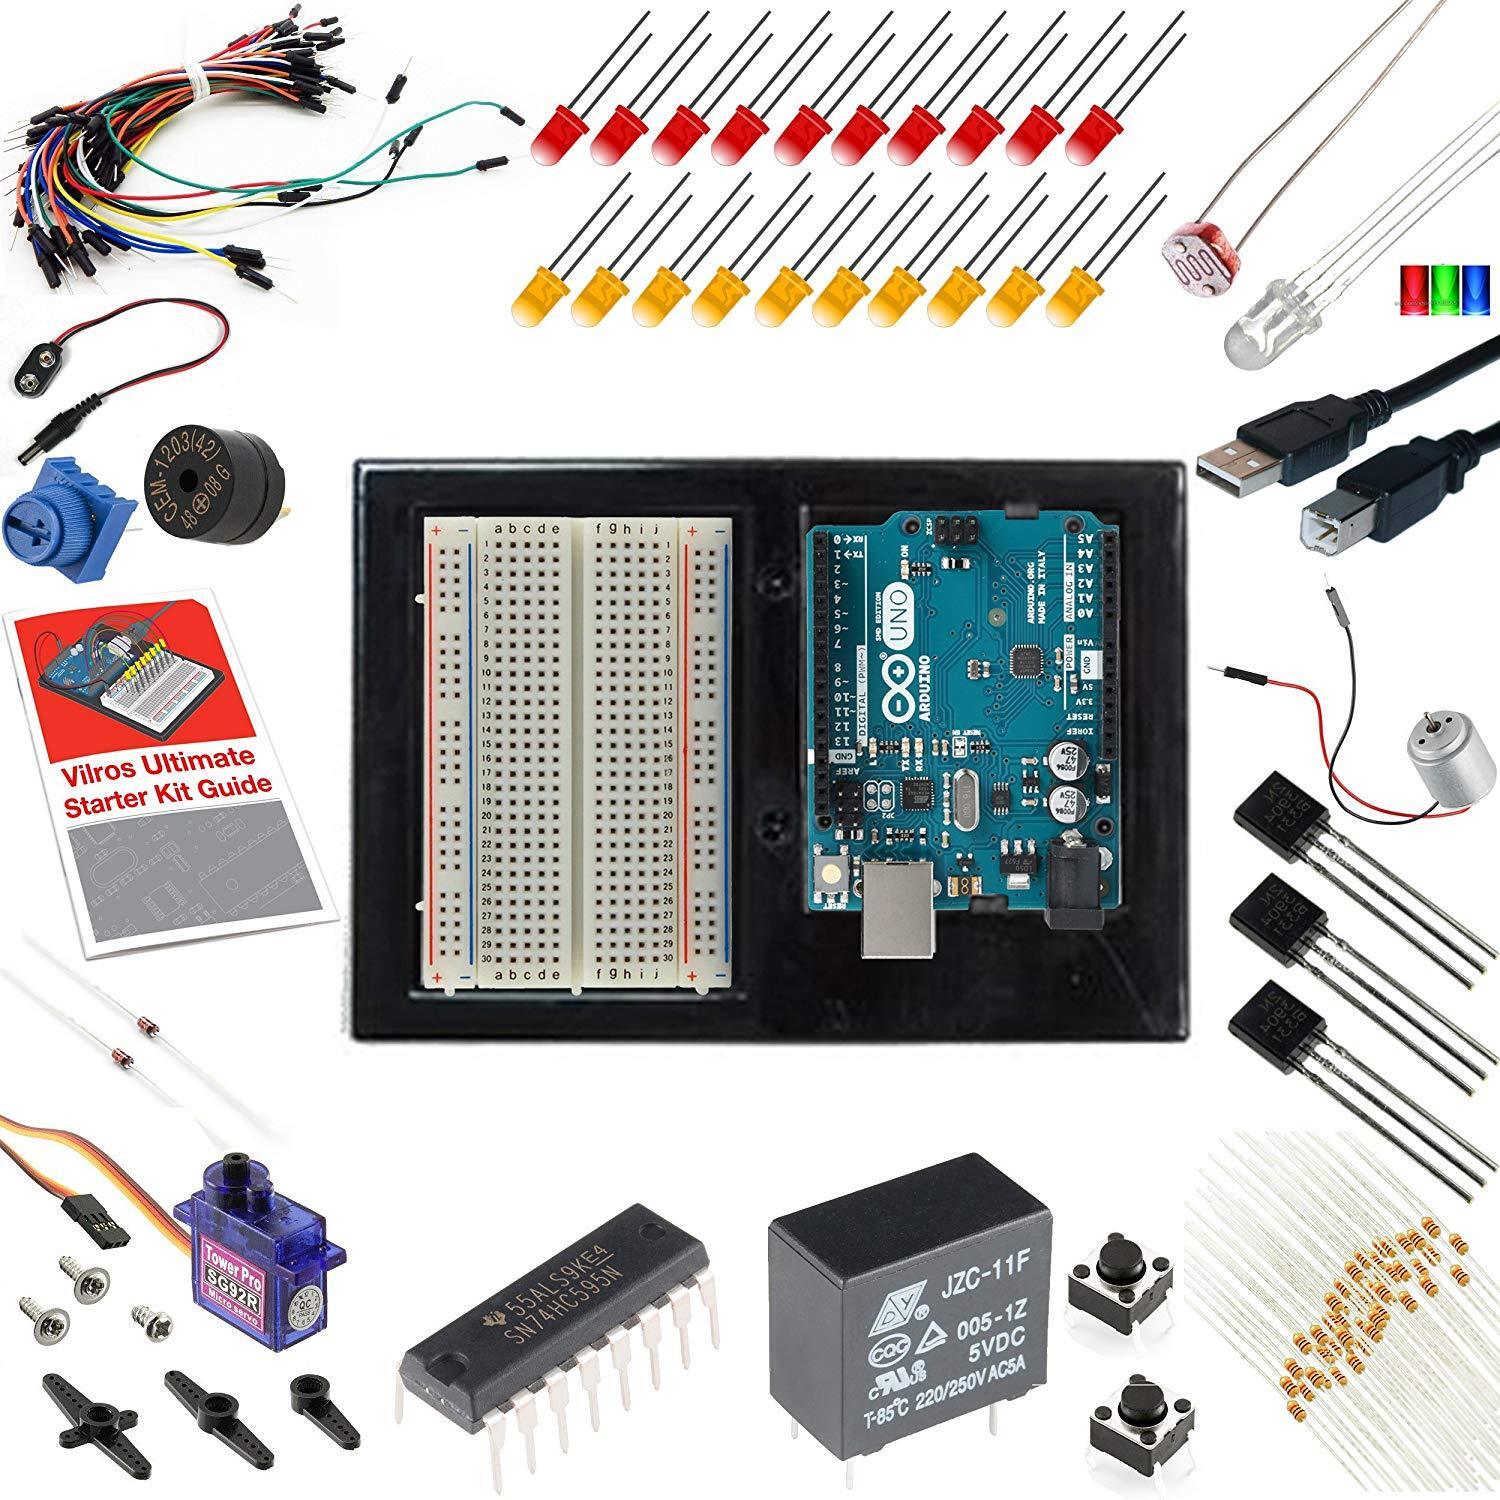 Vilros Arduino Uno 3 Ultimate Starter Kit Includes 12 Circuit Learning Guide